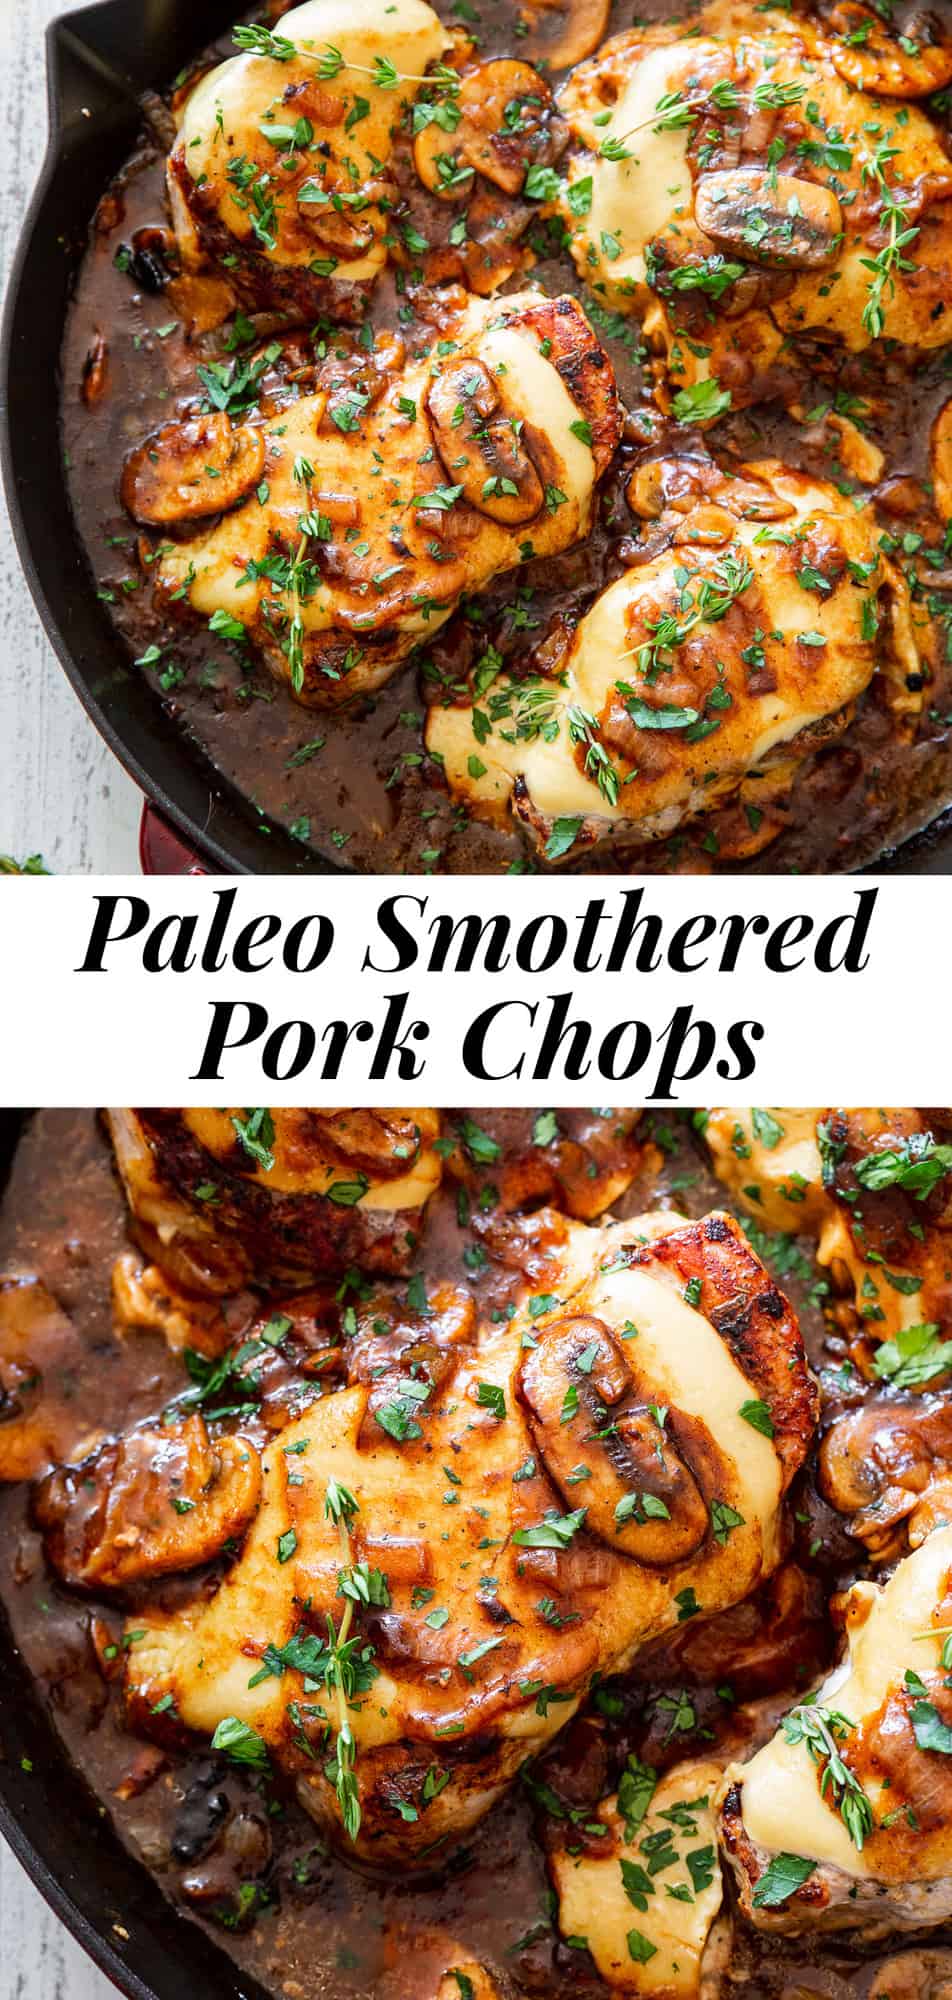 This Paleo French Onion Smothered Pork Chops is made all in one skillet and has become a family favorite! The pork chops are pan fried and loaded with caramelized onions and sautéed mushrooms, a savory gravy and an addicting dairy free “cheese” sauce. This easy, flavor-packed dinner is quick enough for weeknights and the leftovers are delicious too! Whole30 compliant and keto friendly. #paleo #whole30 #cleaneating #lowcarb #keto